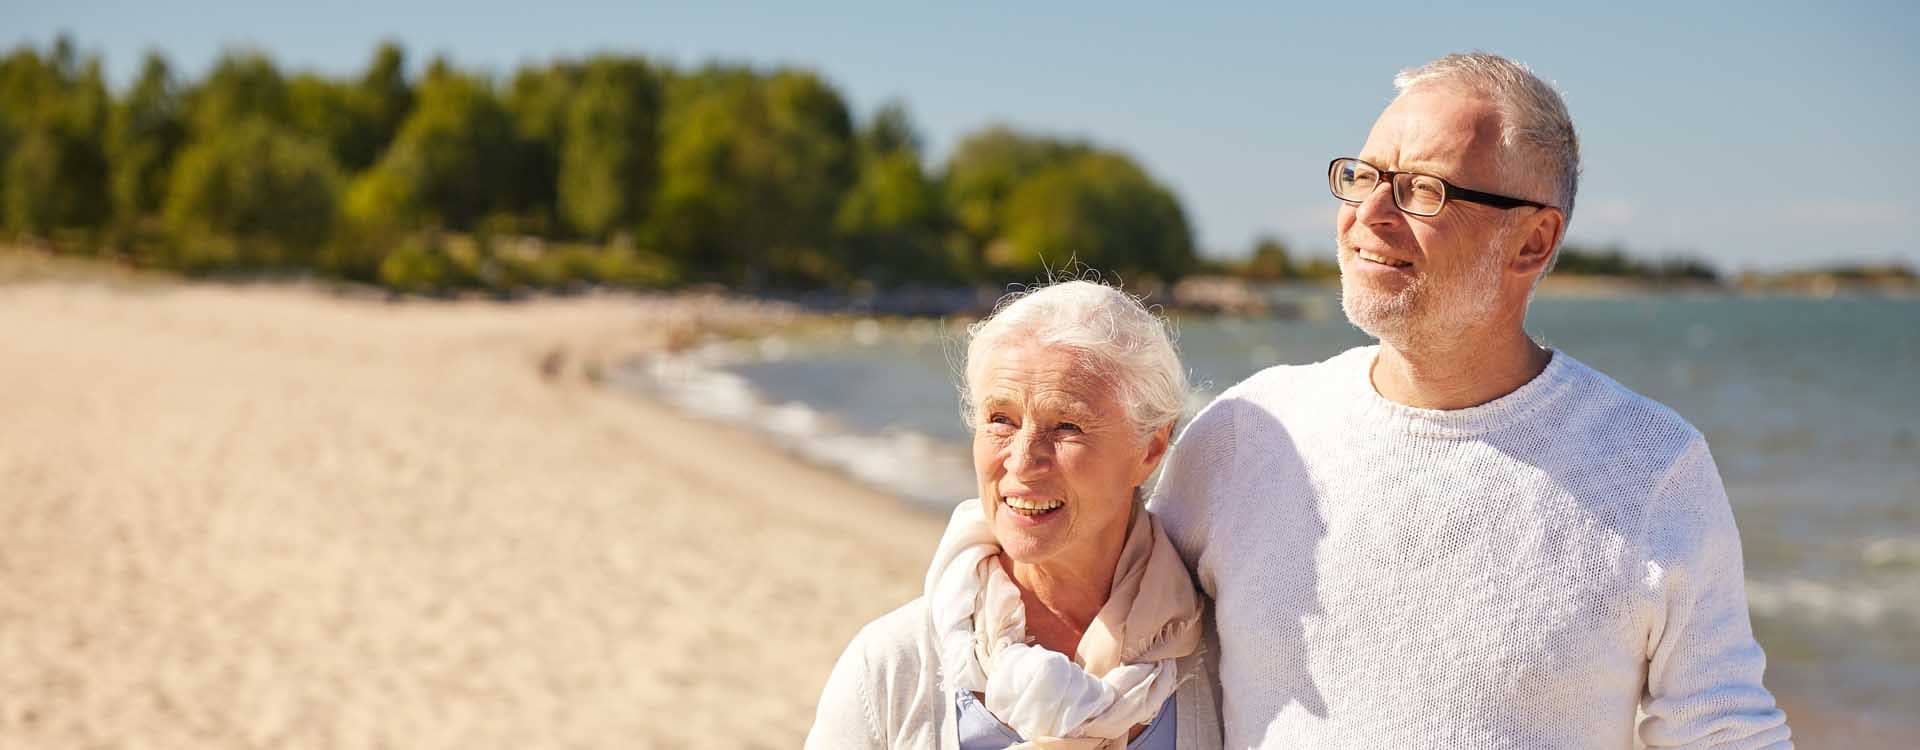 Tips for senior parents visiting the USA